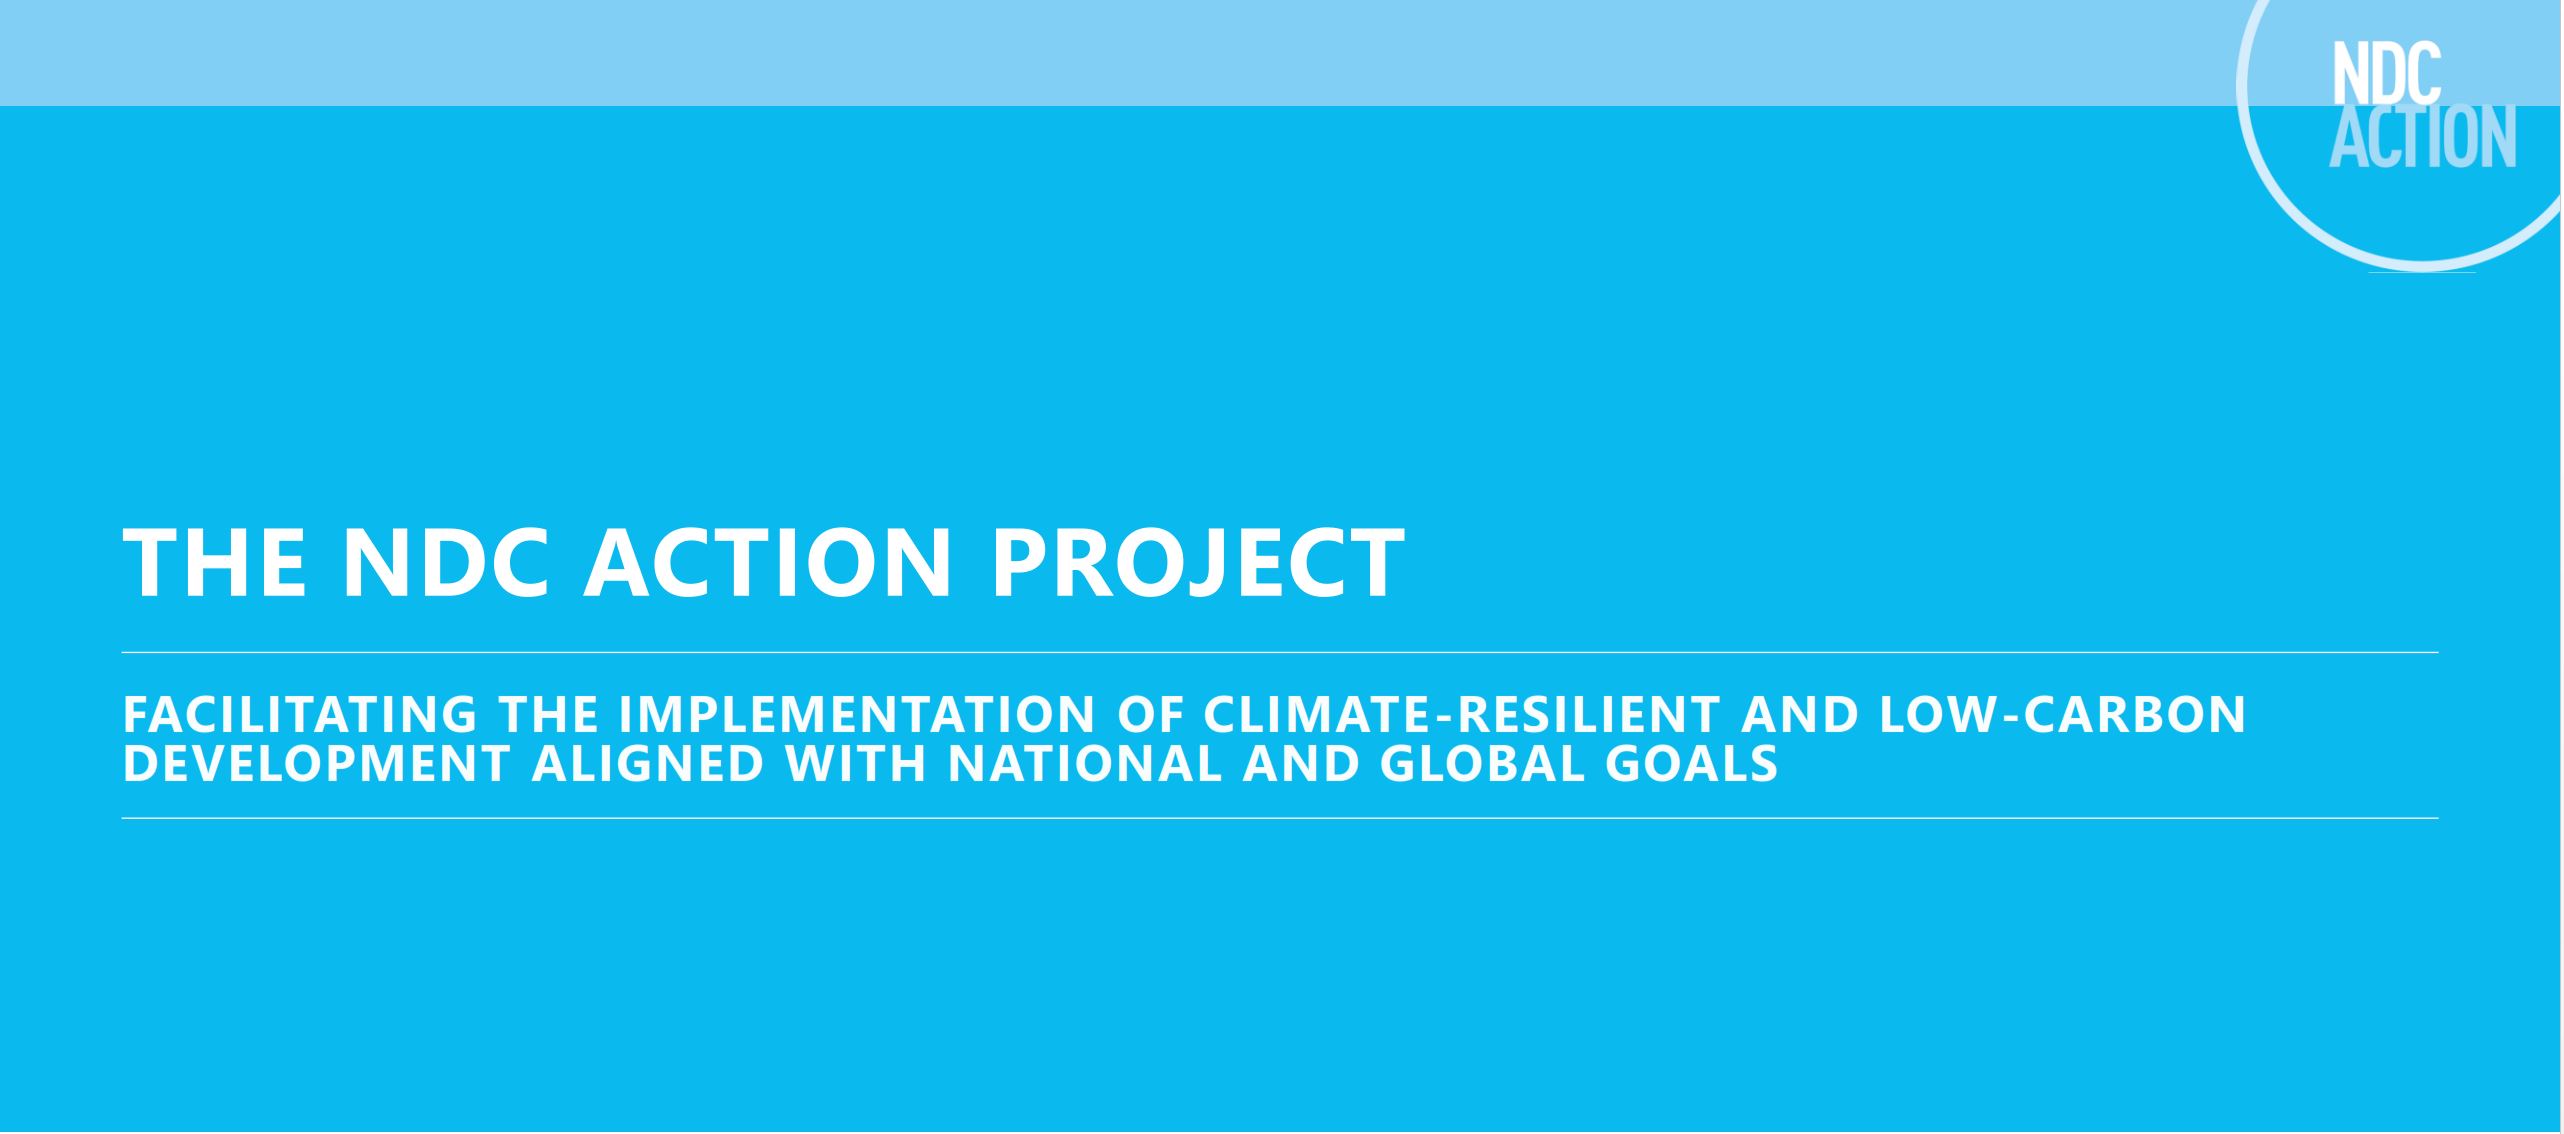 Facilitating the implementation of climate-resilient and low-carbon development aligned with national and global goals